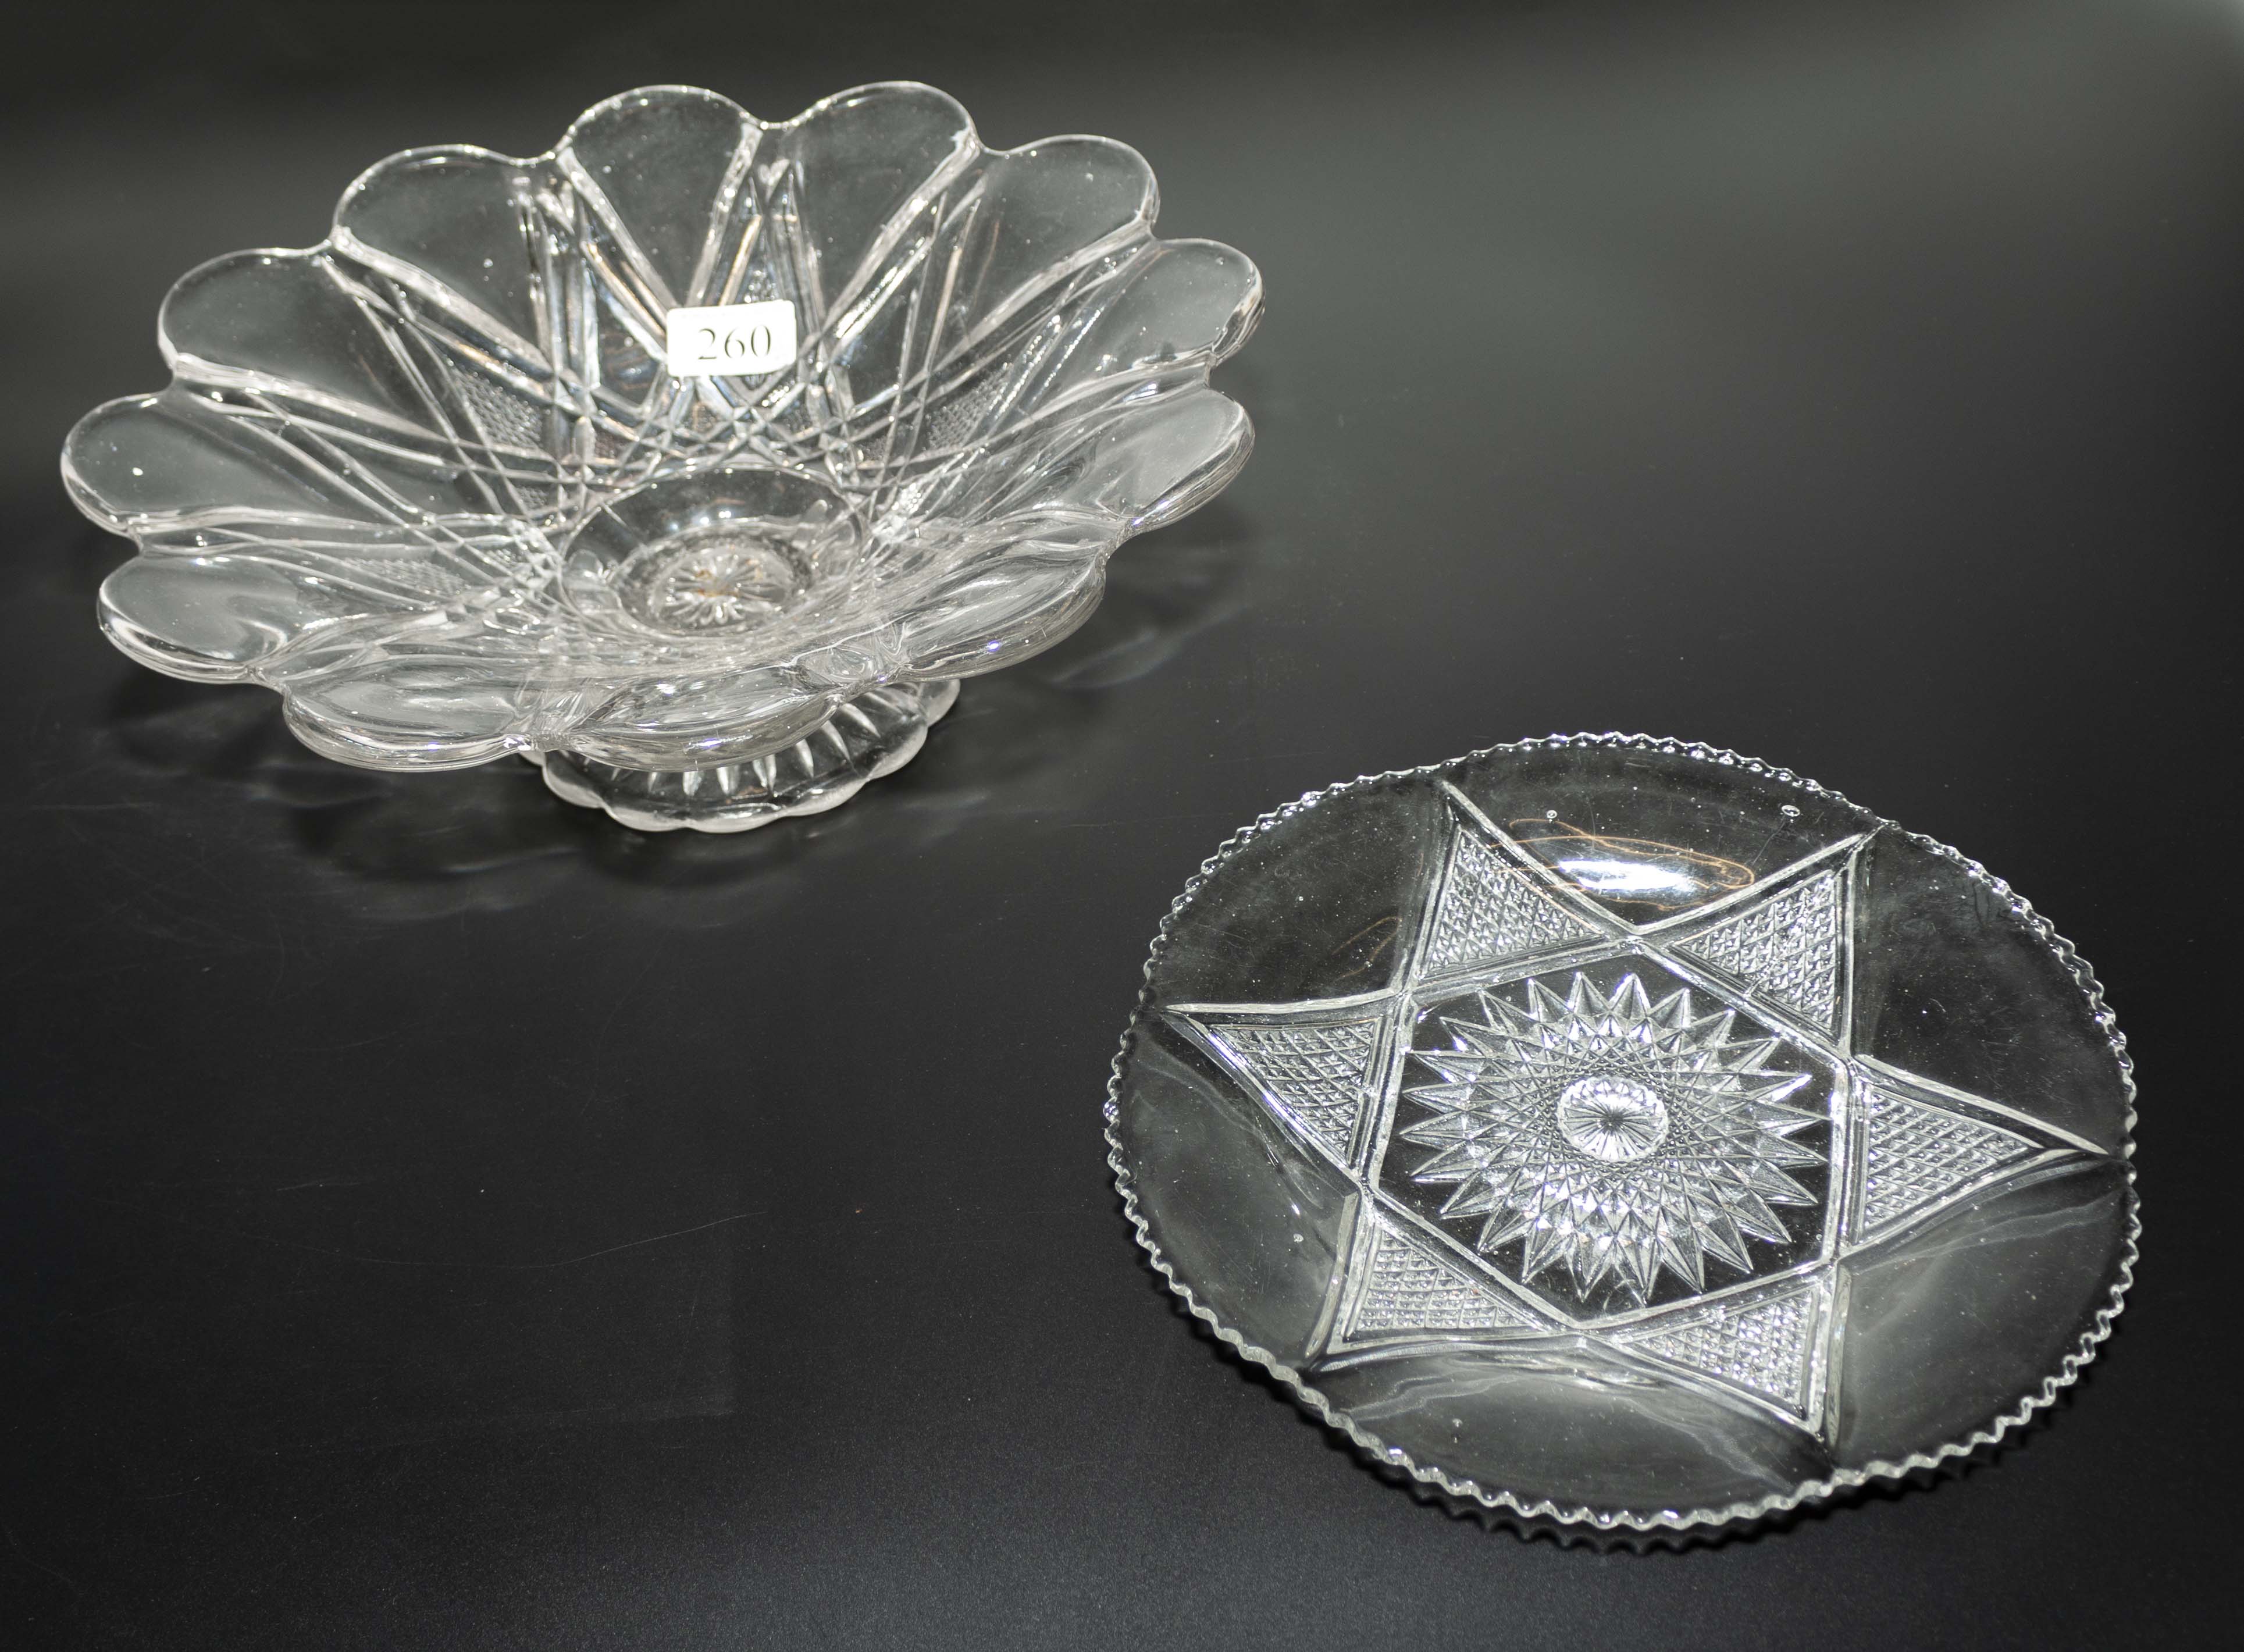 A pressed glass bowl and a plate